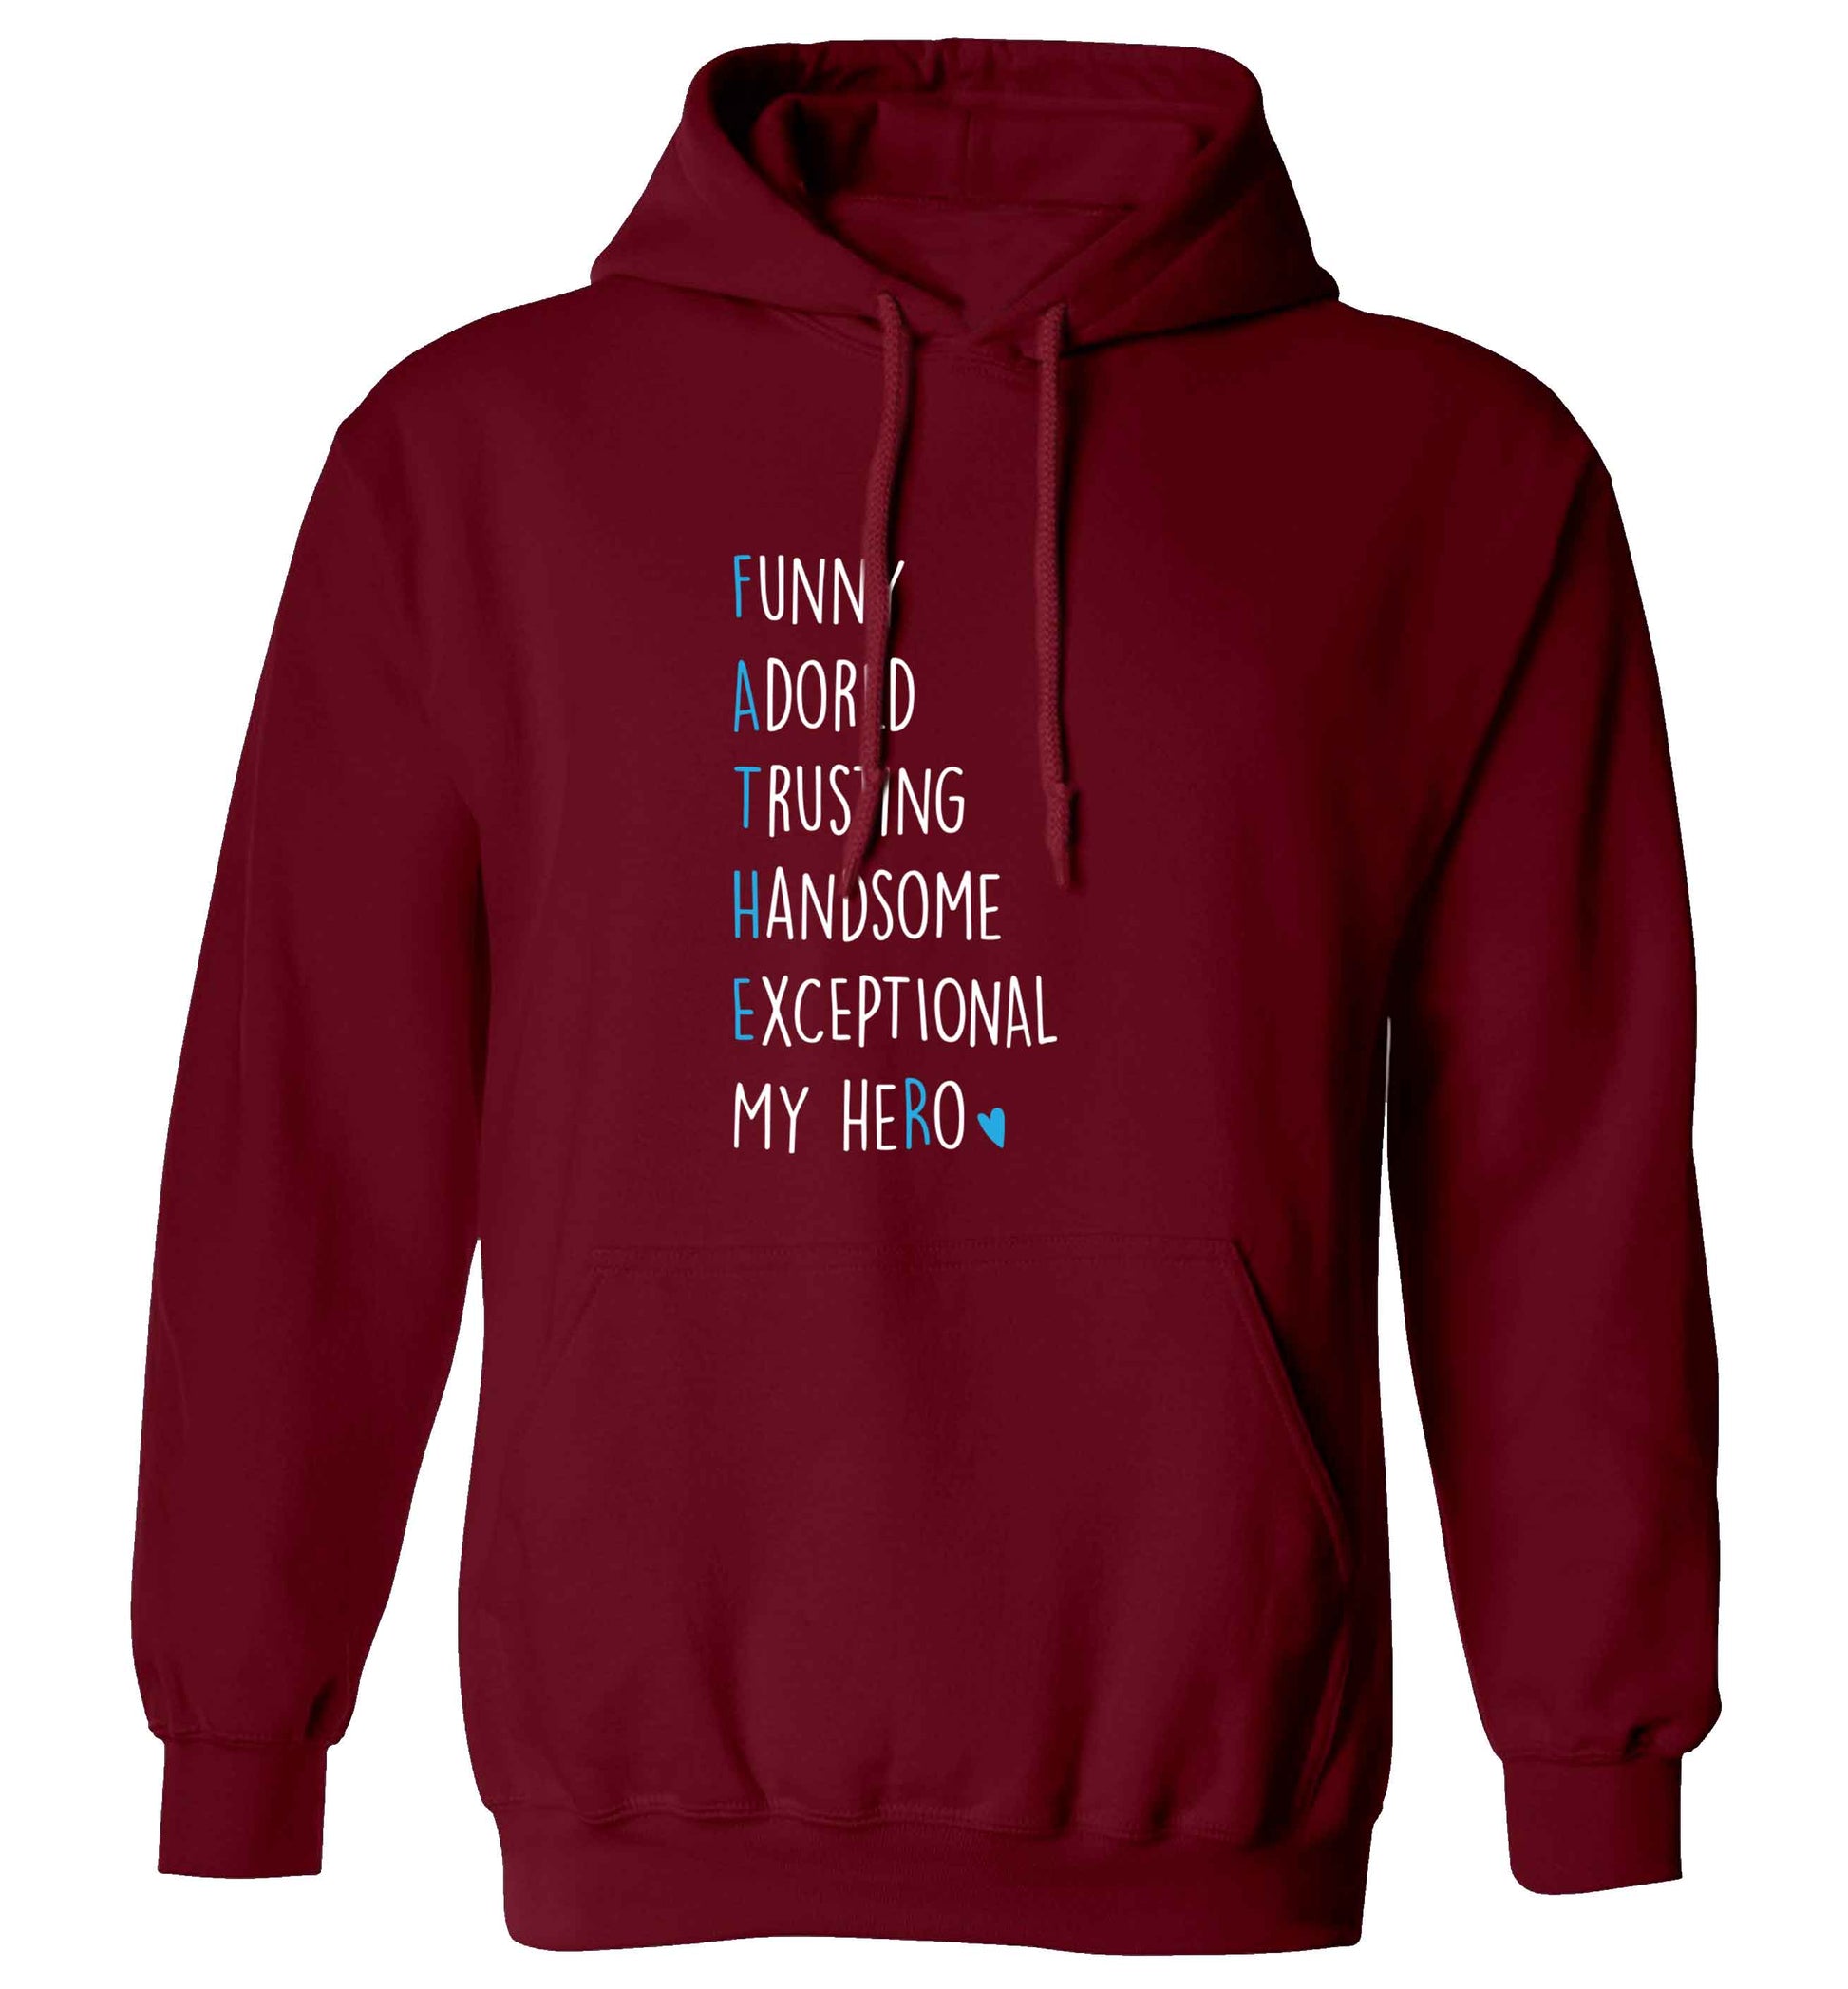 Father, funny adored trusting handsome exceptional my hero adults unisex maroon hoodie 2XL